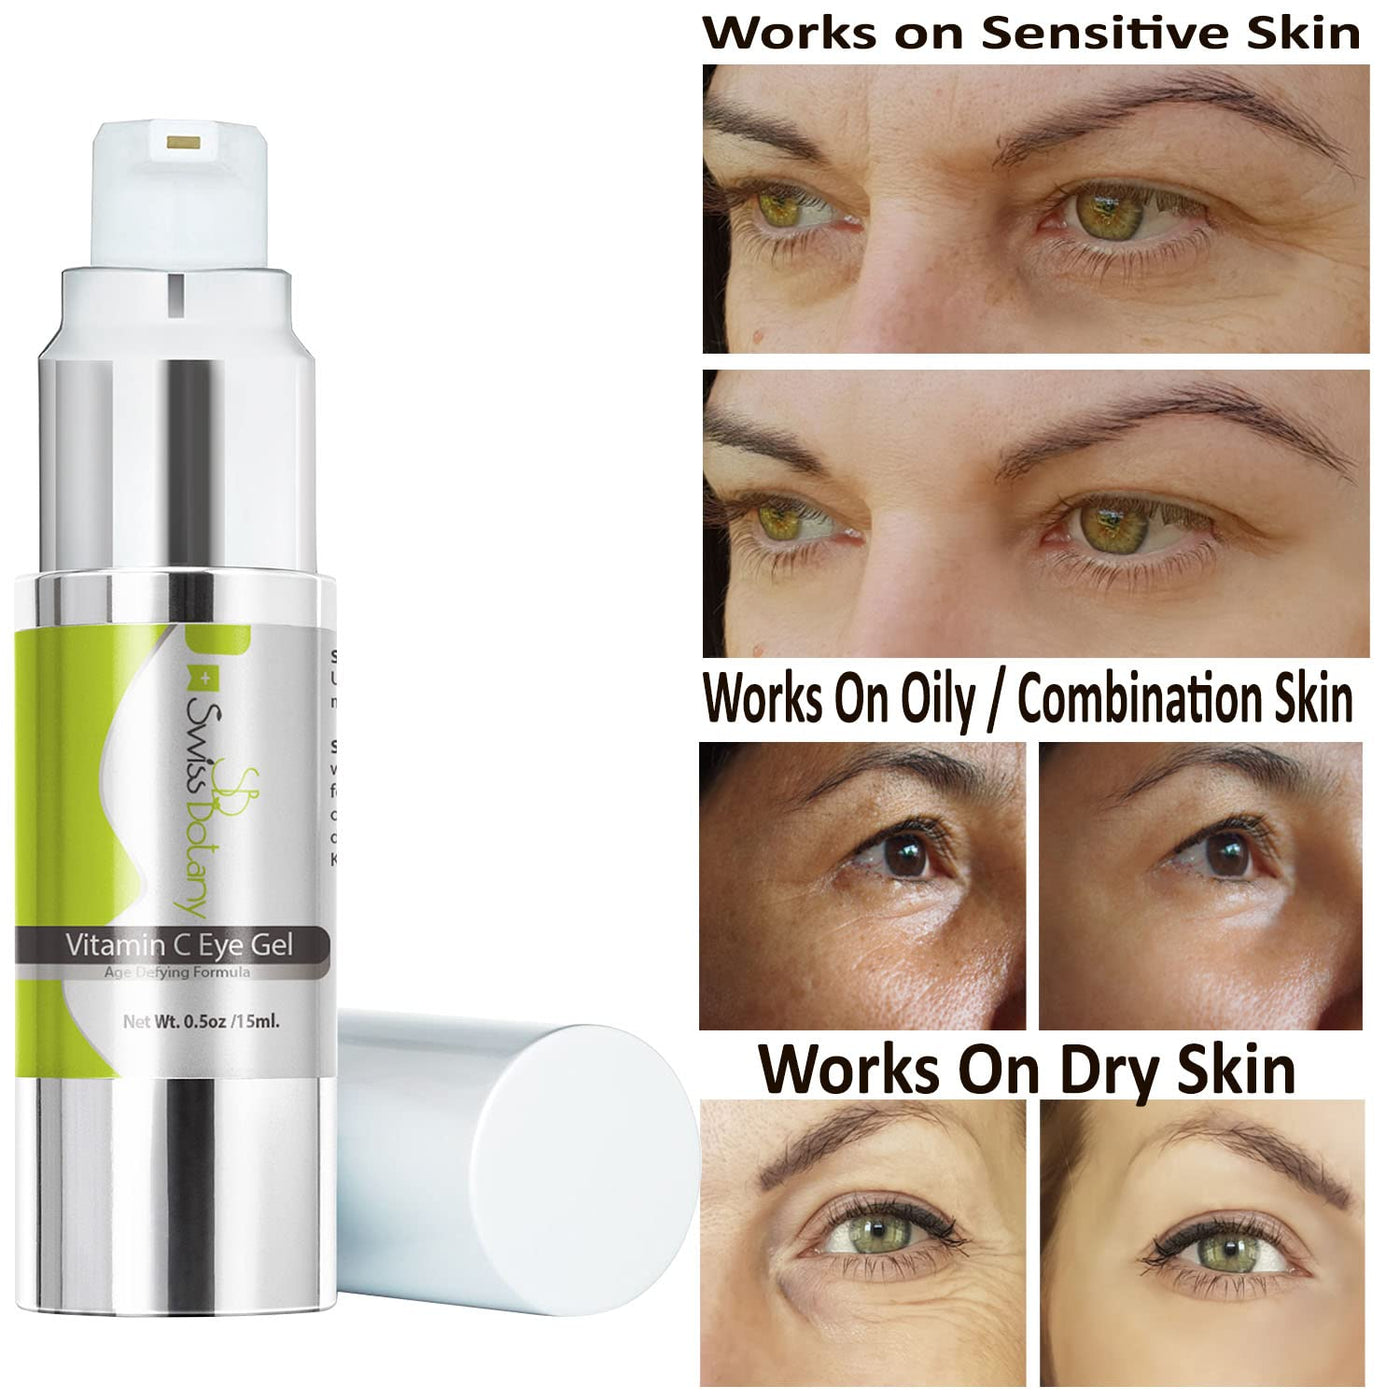 Swiss Botany Beauty 1 / 1 Eye Gel Serum Professional Restoration For EYE BAGS & WRINKLES, DARK CIRCLES, PUFFINESS for men and women with Pure Vitamin C Hyaluronic Acid | MADE IN USA